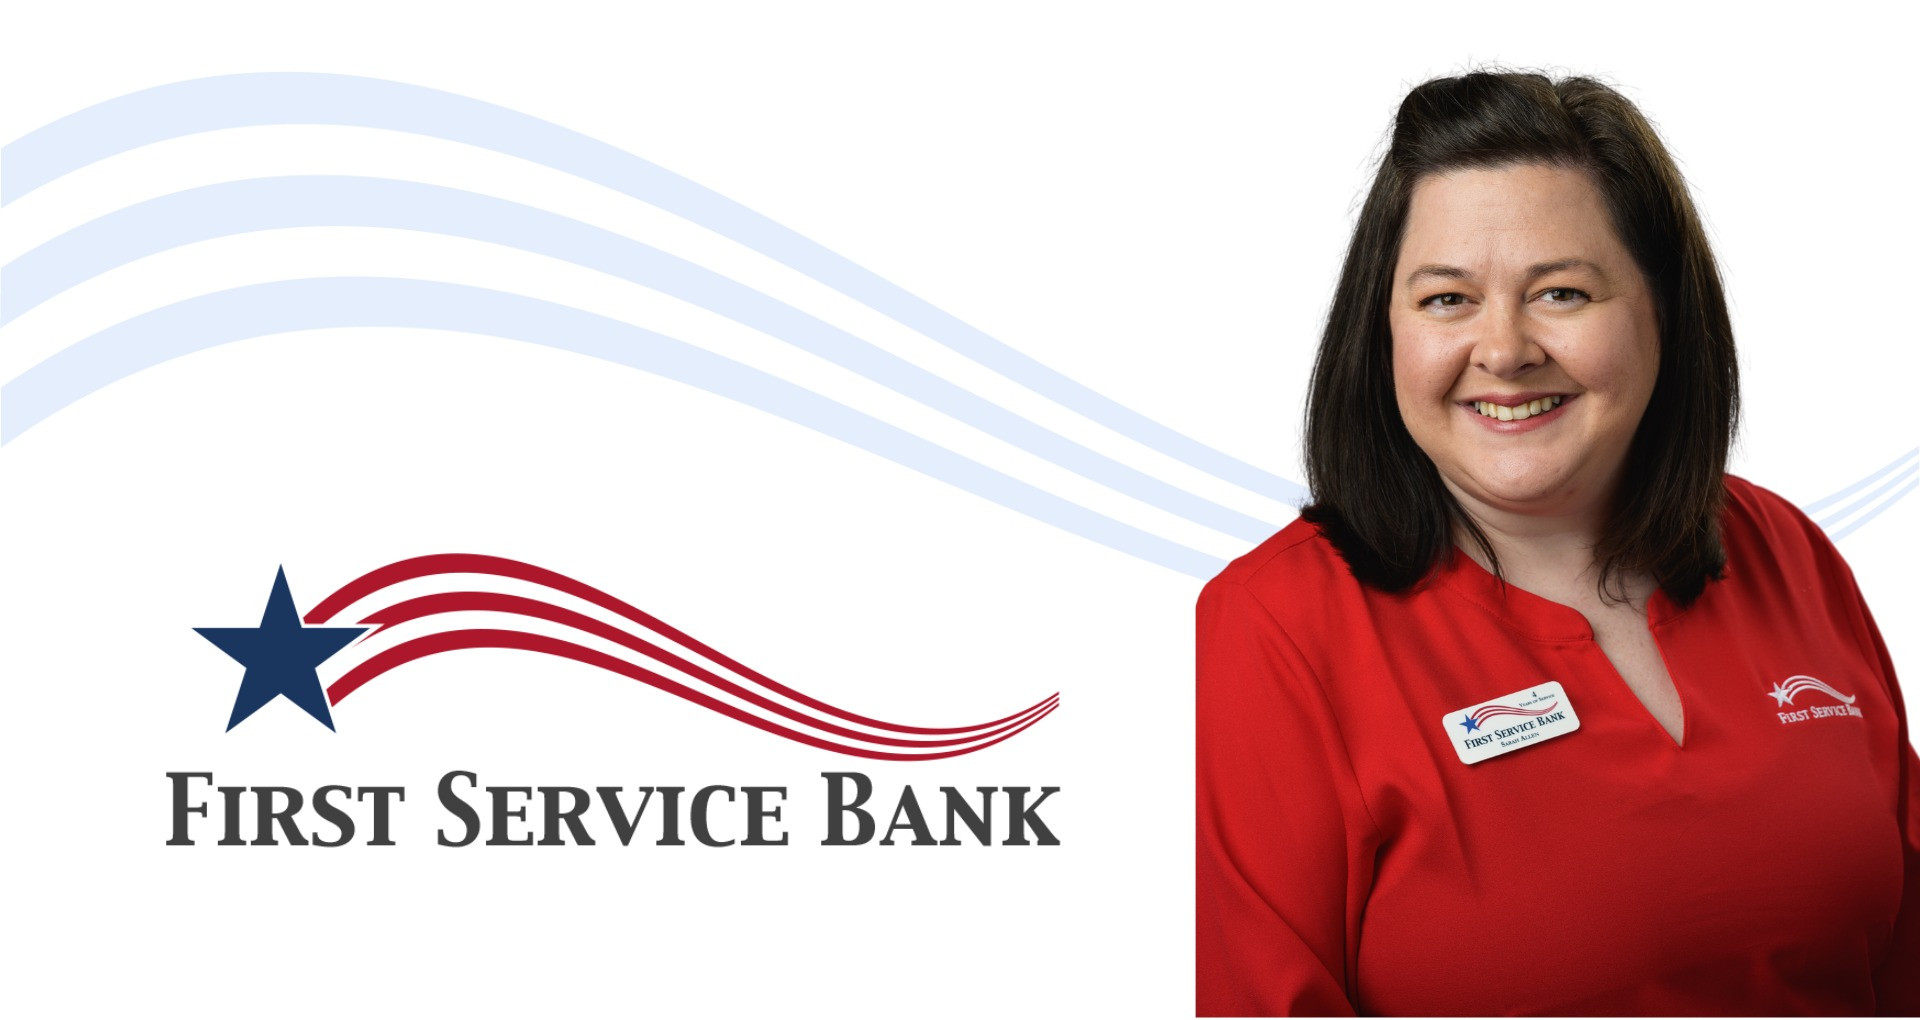 First Service Bank Congratulates Sarah Allen on Her Promotion to Senior Project Manager